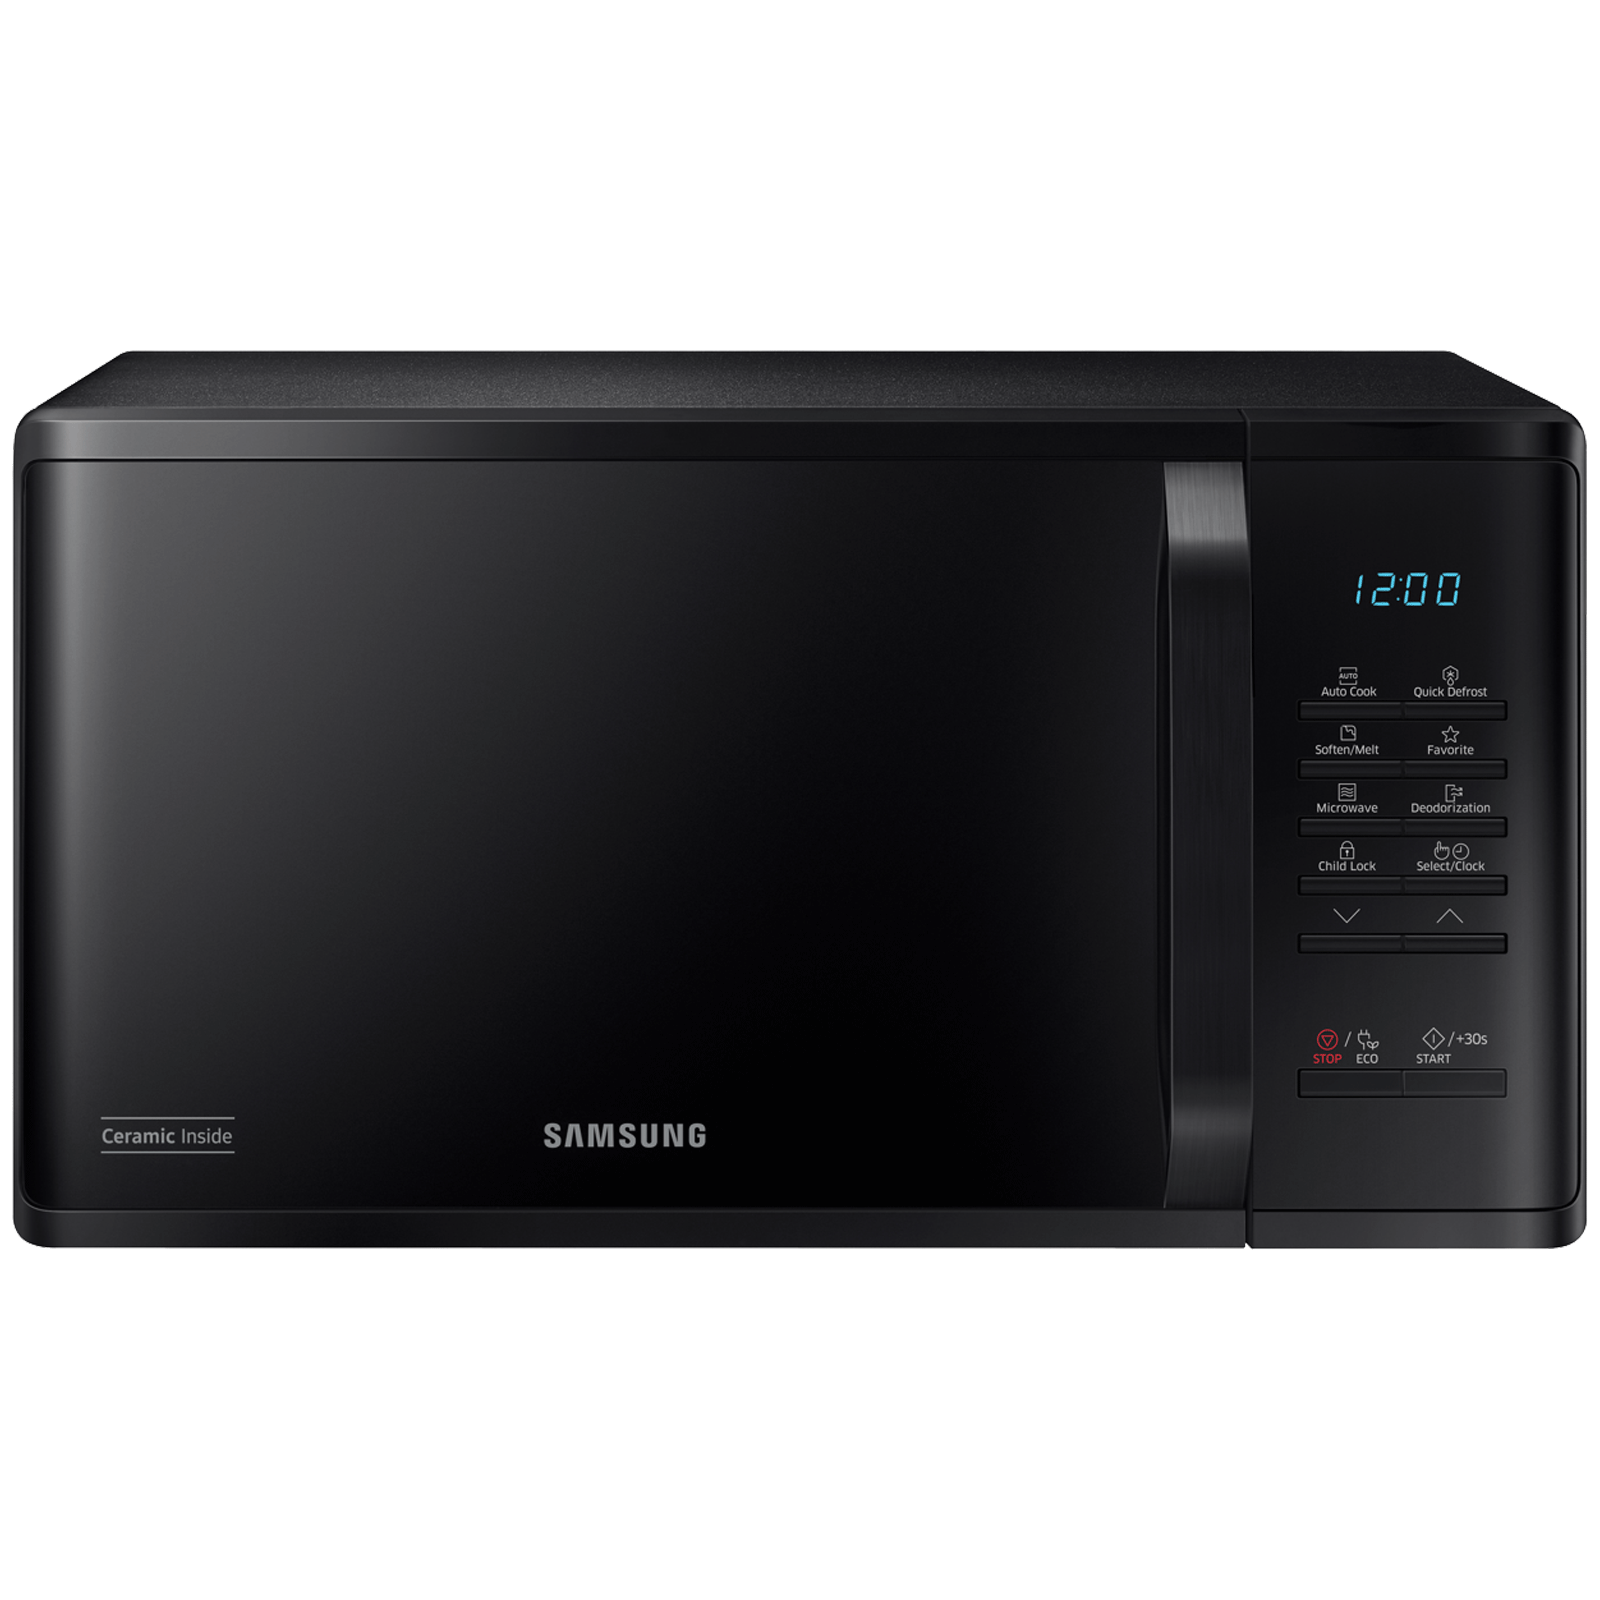 Samsung MW3500K 23 Litres Solo Microwave Oven (Multiple Cooking Modes, MS23A3513AK/TL, Black)_1